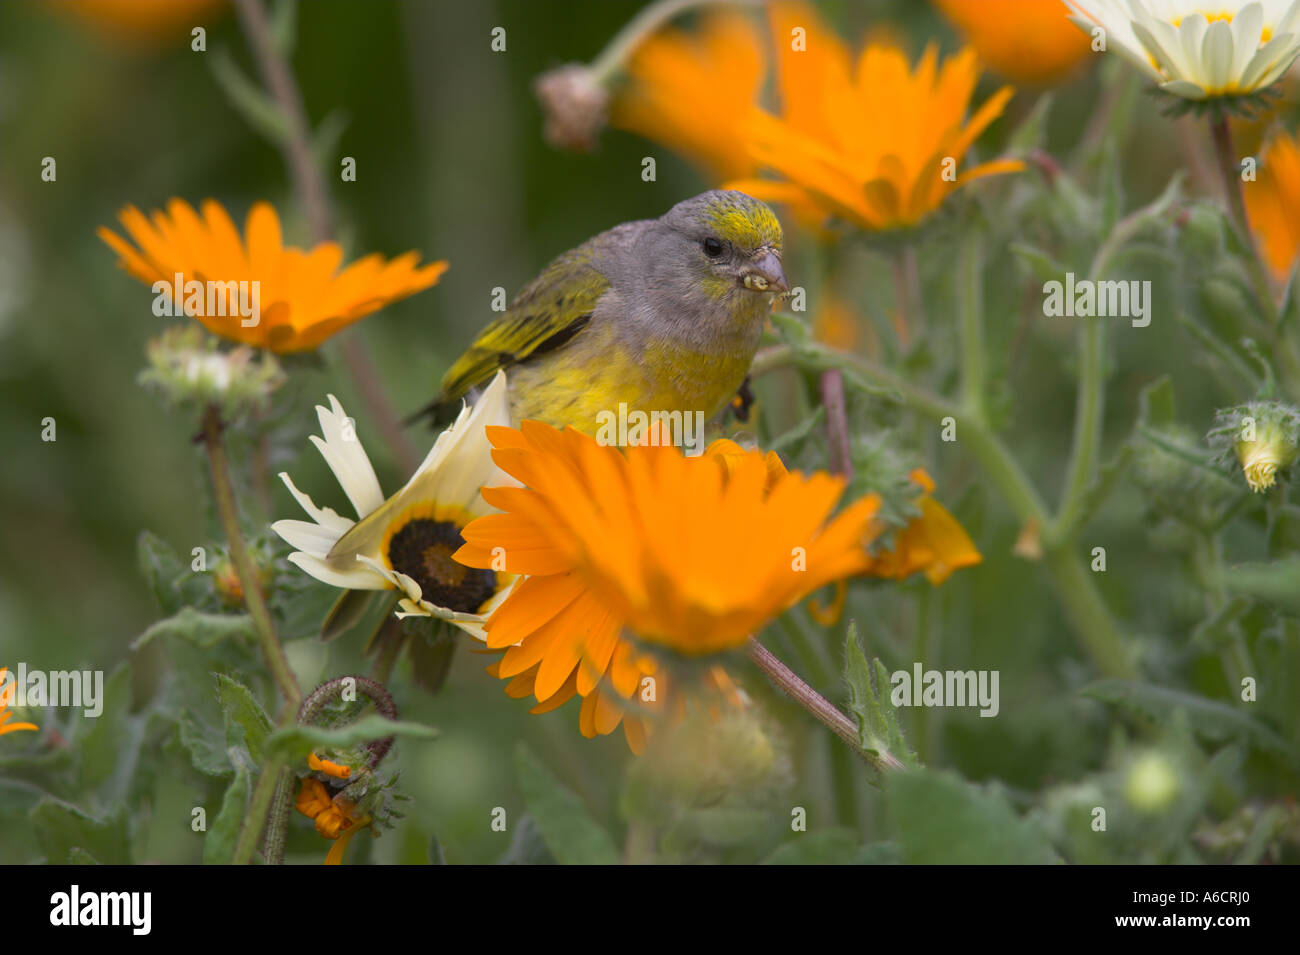 Cape canary feeding on spring annual flowers Kirstenbosch Botanic Gardens Cape Town South Africa Stock Photo